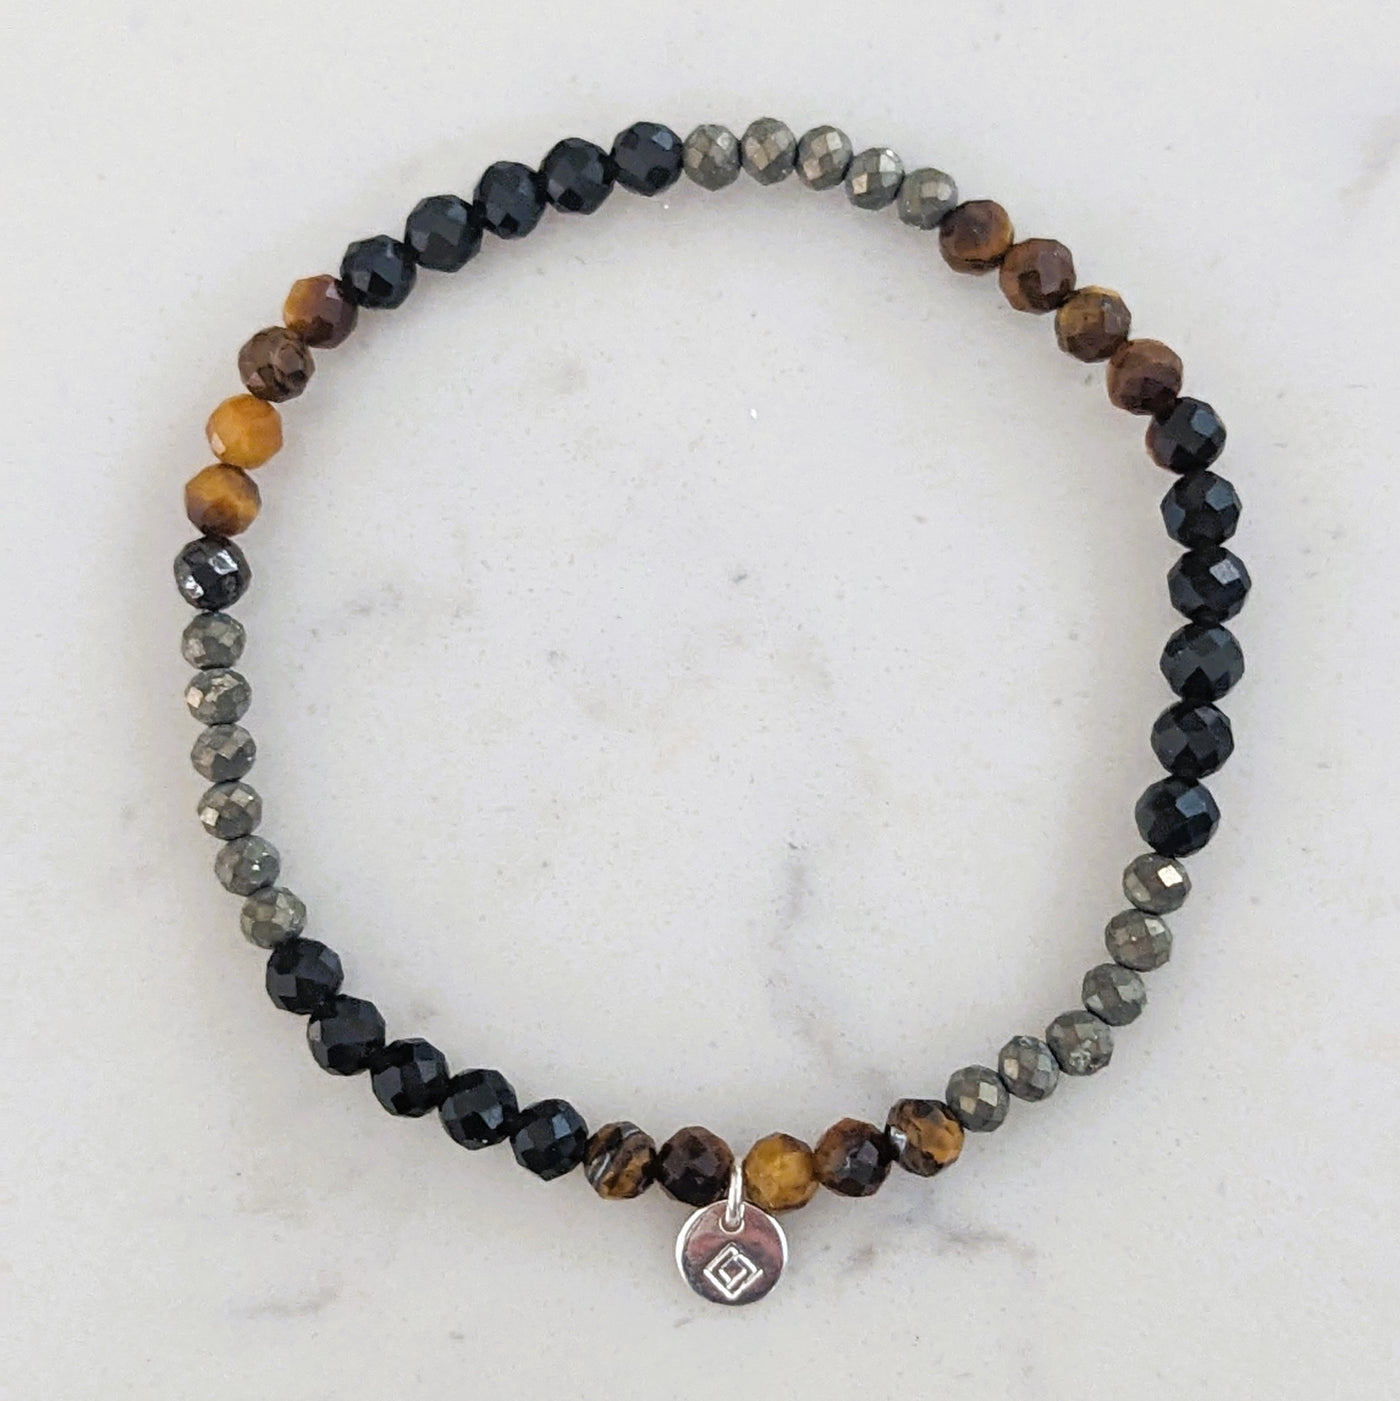 3mm faceted pyrite, tigers eye and obsidian gemstone bracelet